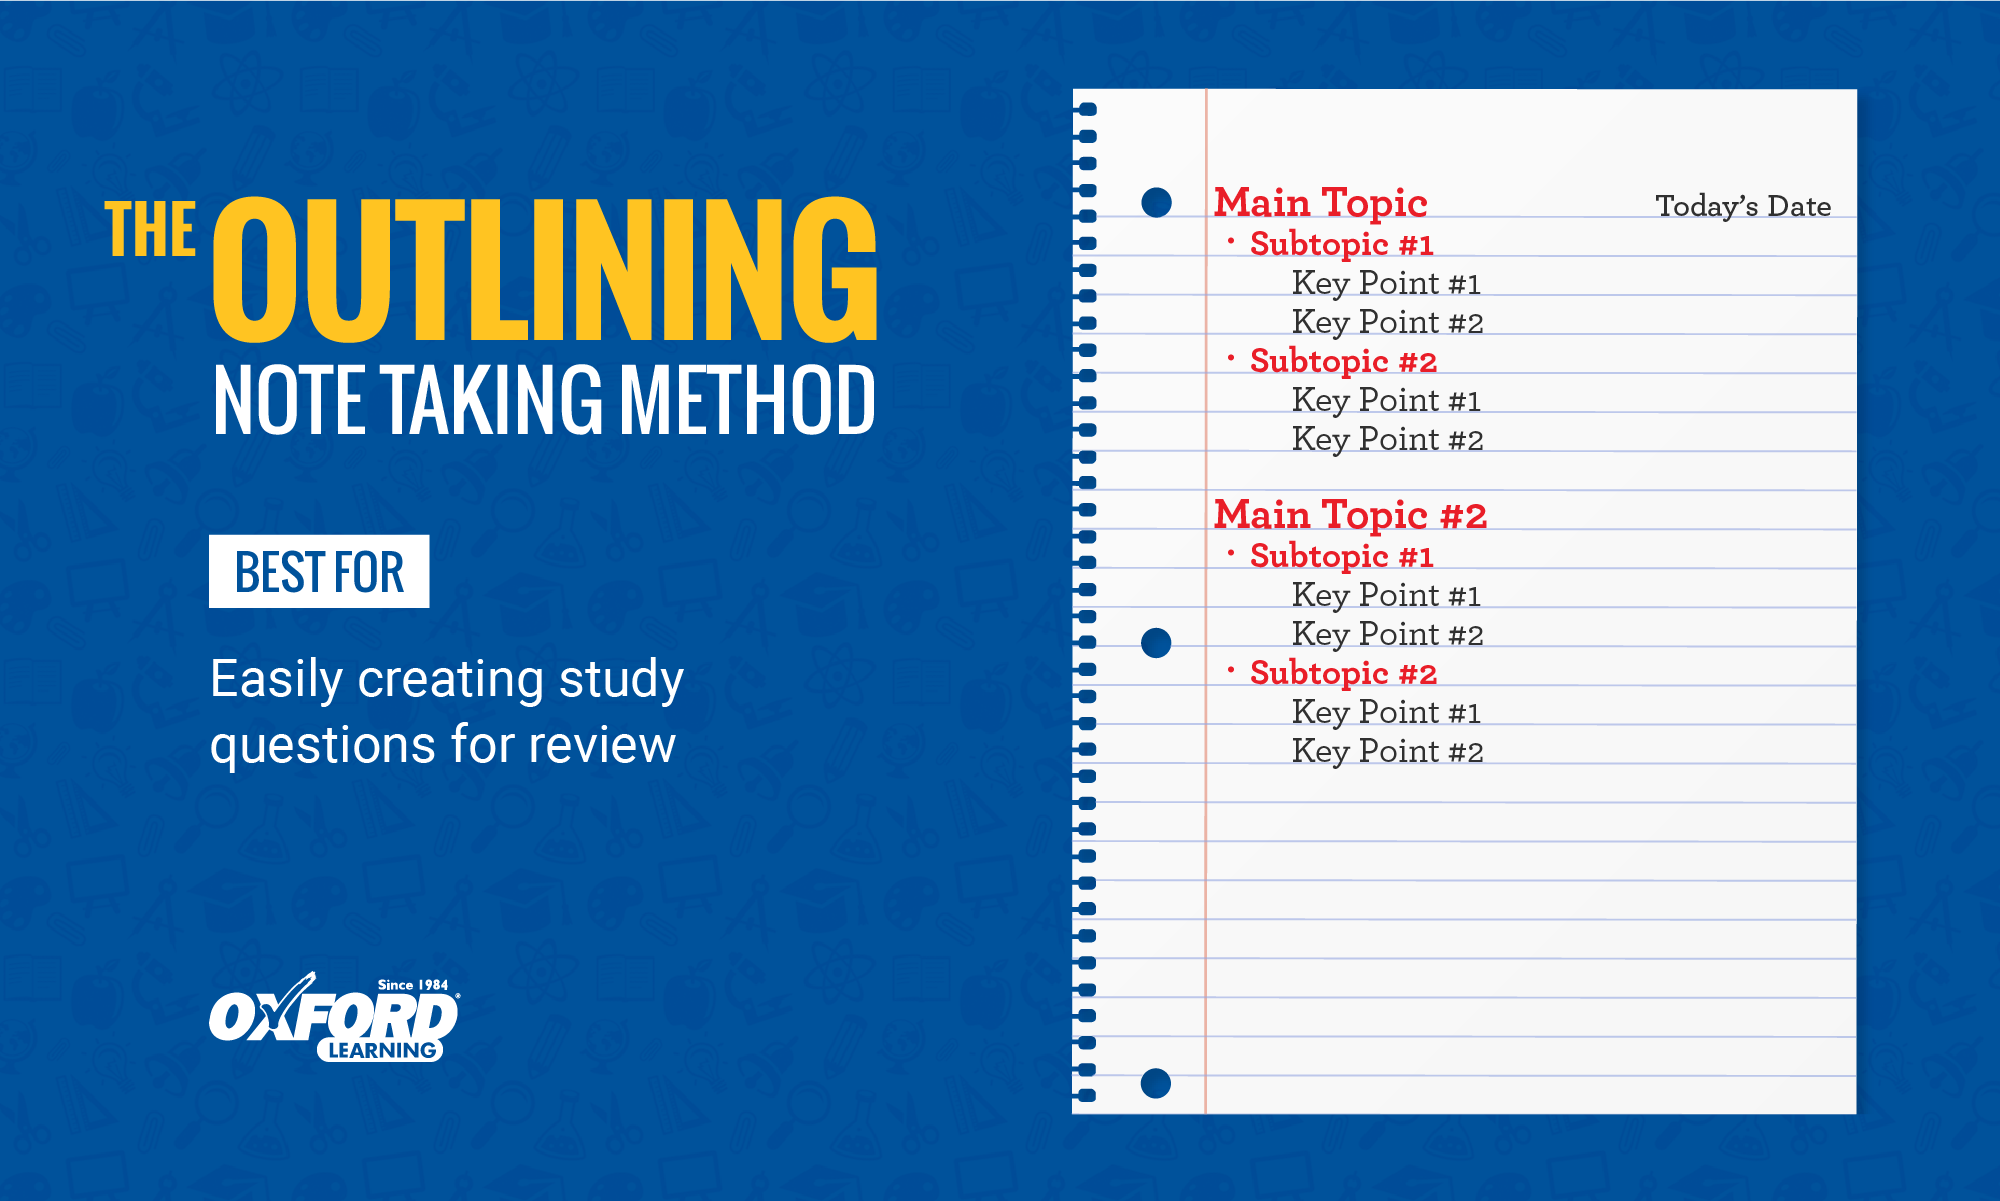 Note Taking, 5 Tips & Methods for Effective Note Taking